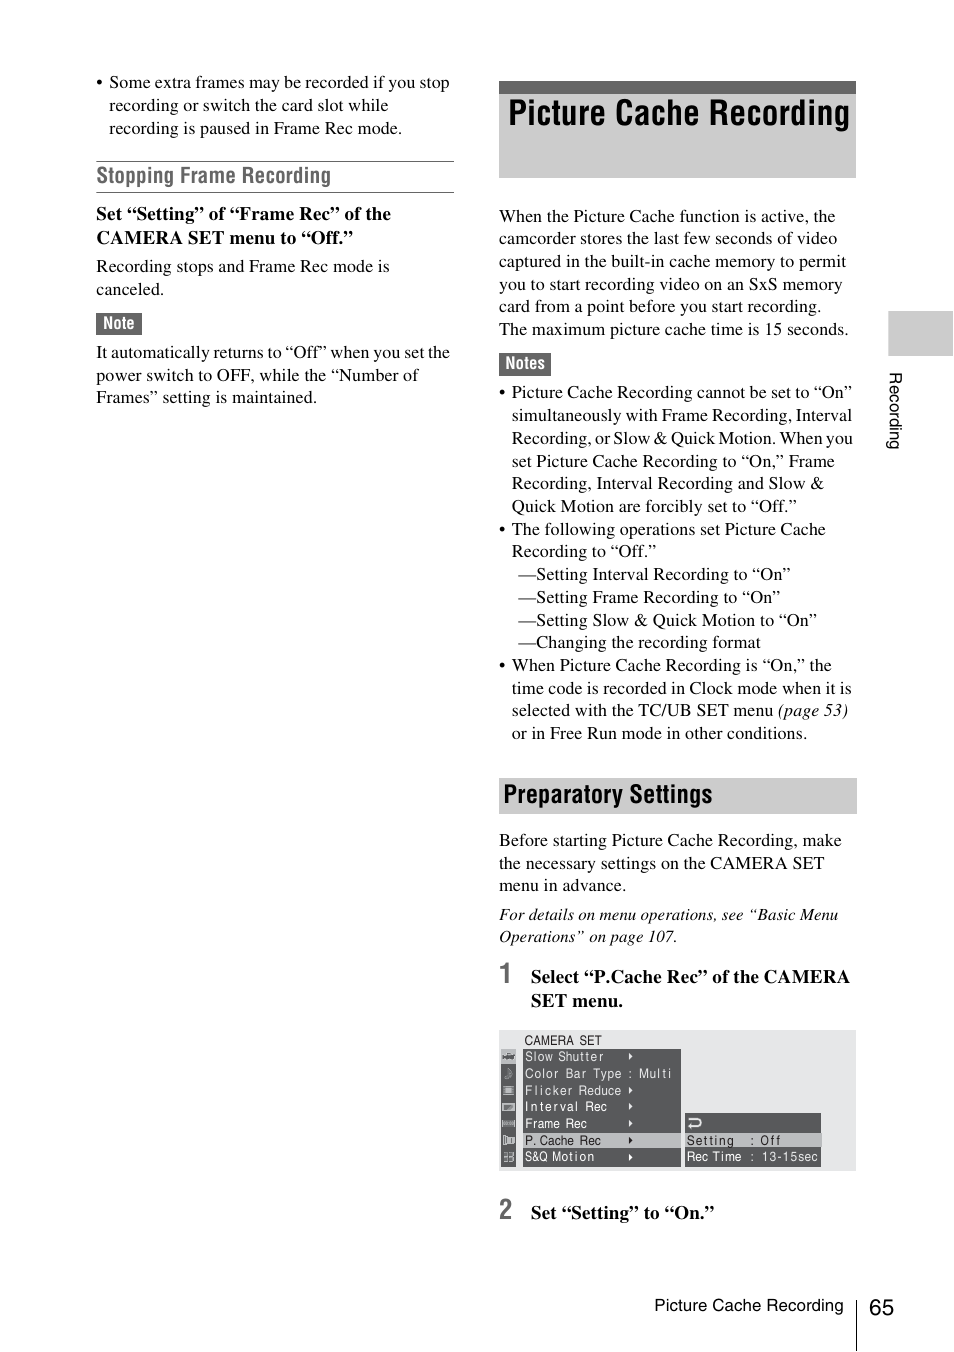 Picture cache recording, Preparatory settings, Stopping frame recording | Sony PMW-F3K User Manual | Page 65 / 164